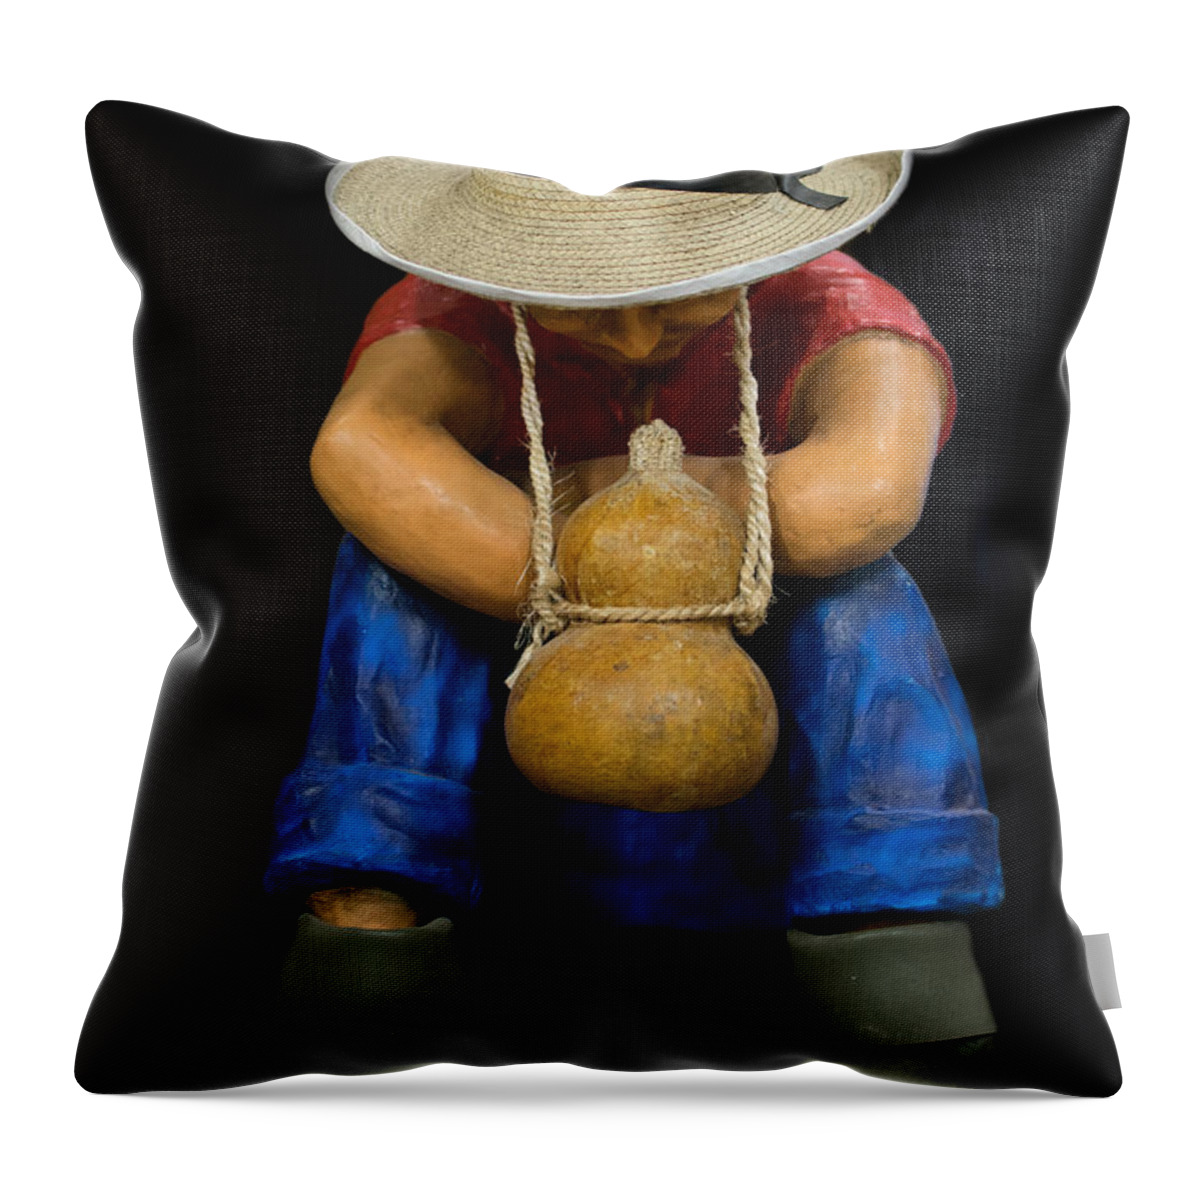 Cipote Throw Pillow featuring the photograph Cipote by Totto Ponce